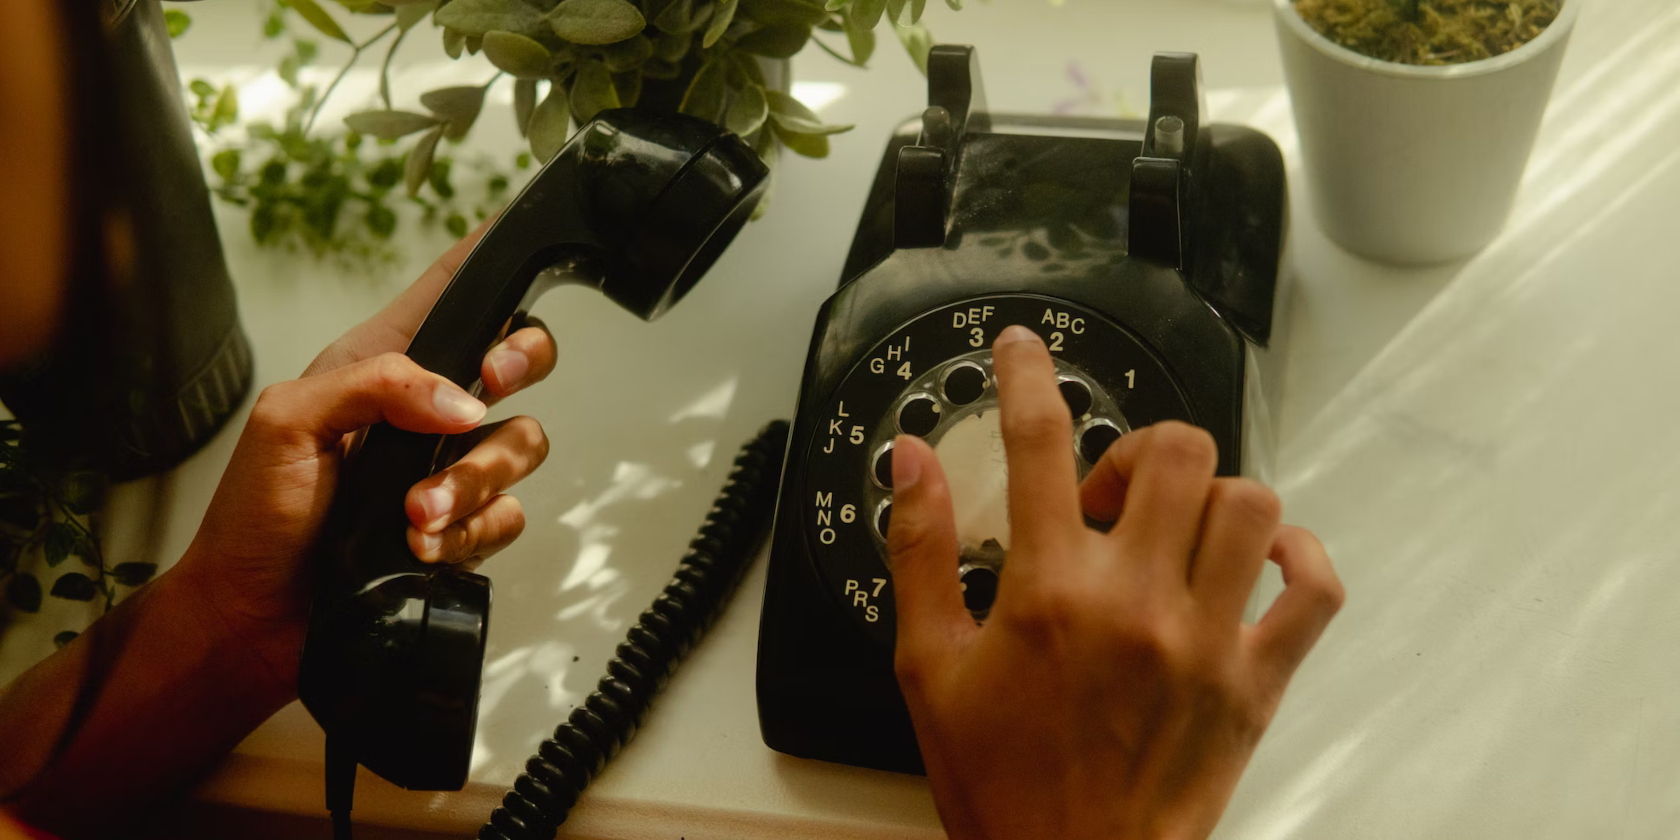 A hand dialling on an old-style rotary telephone